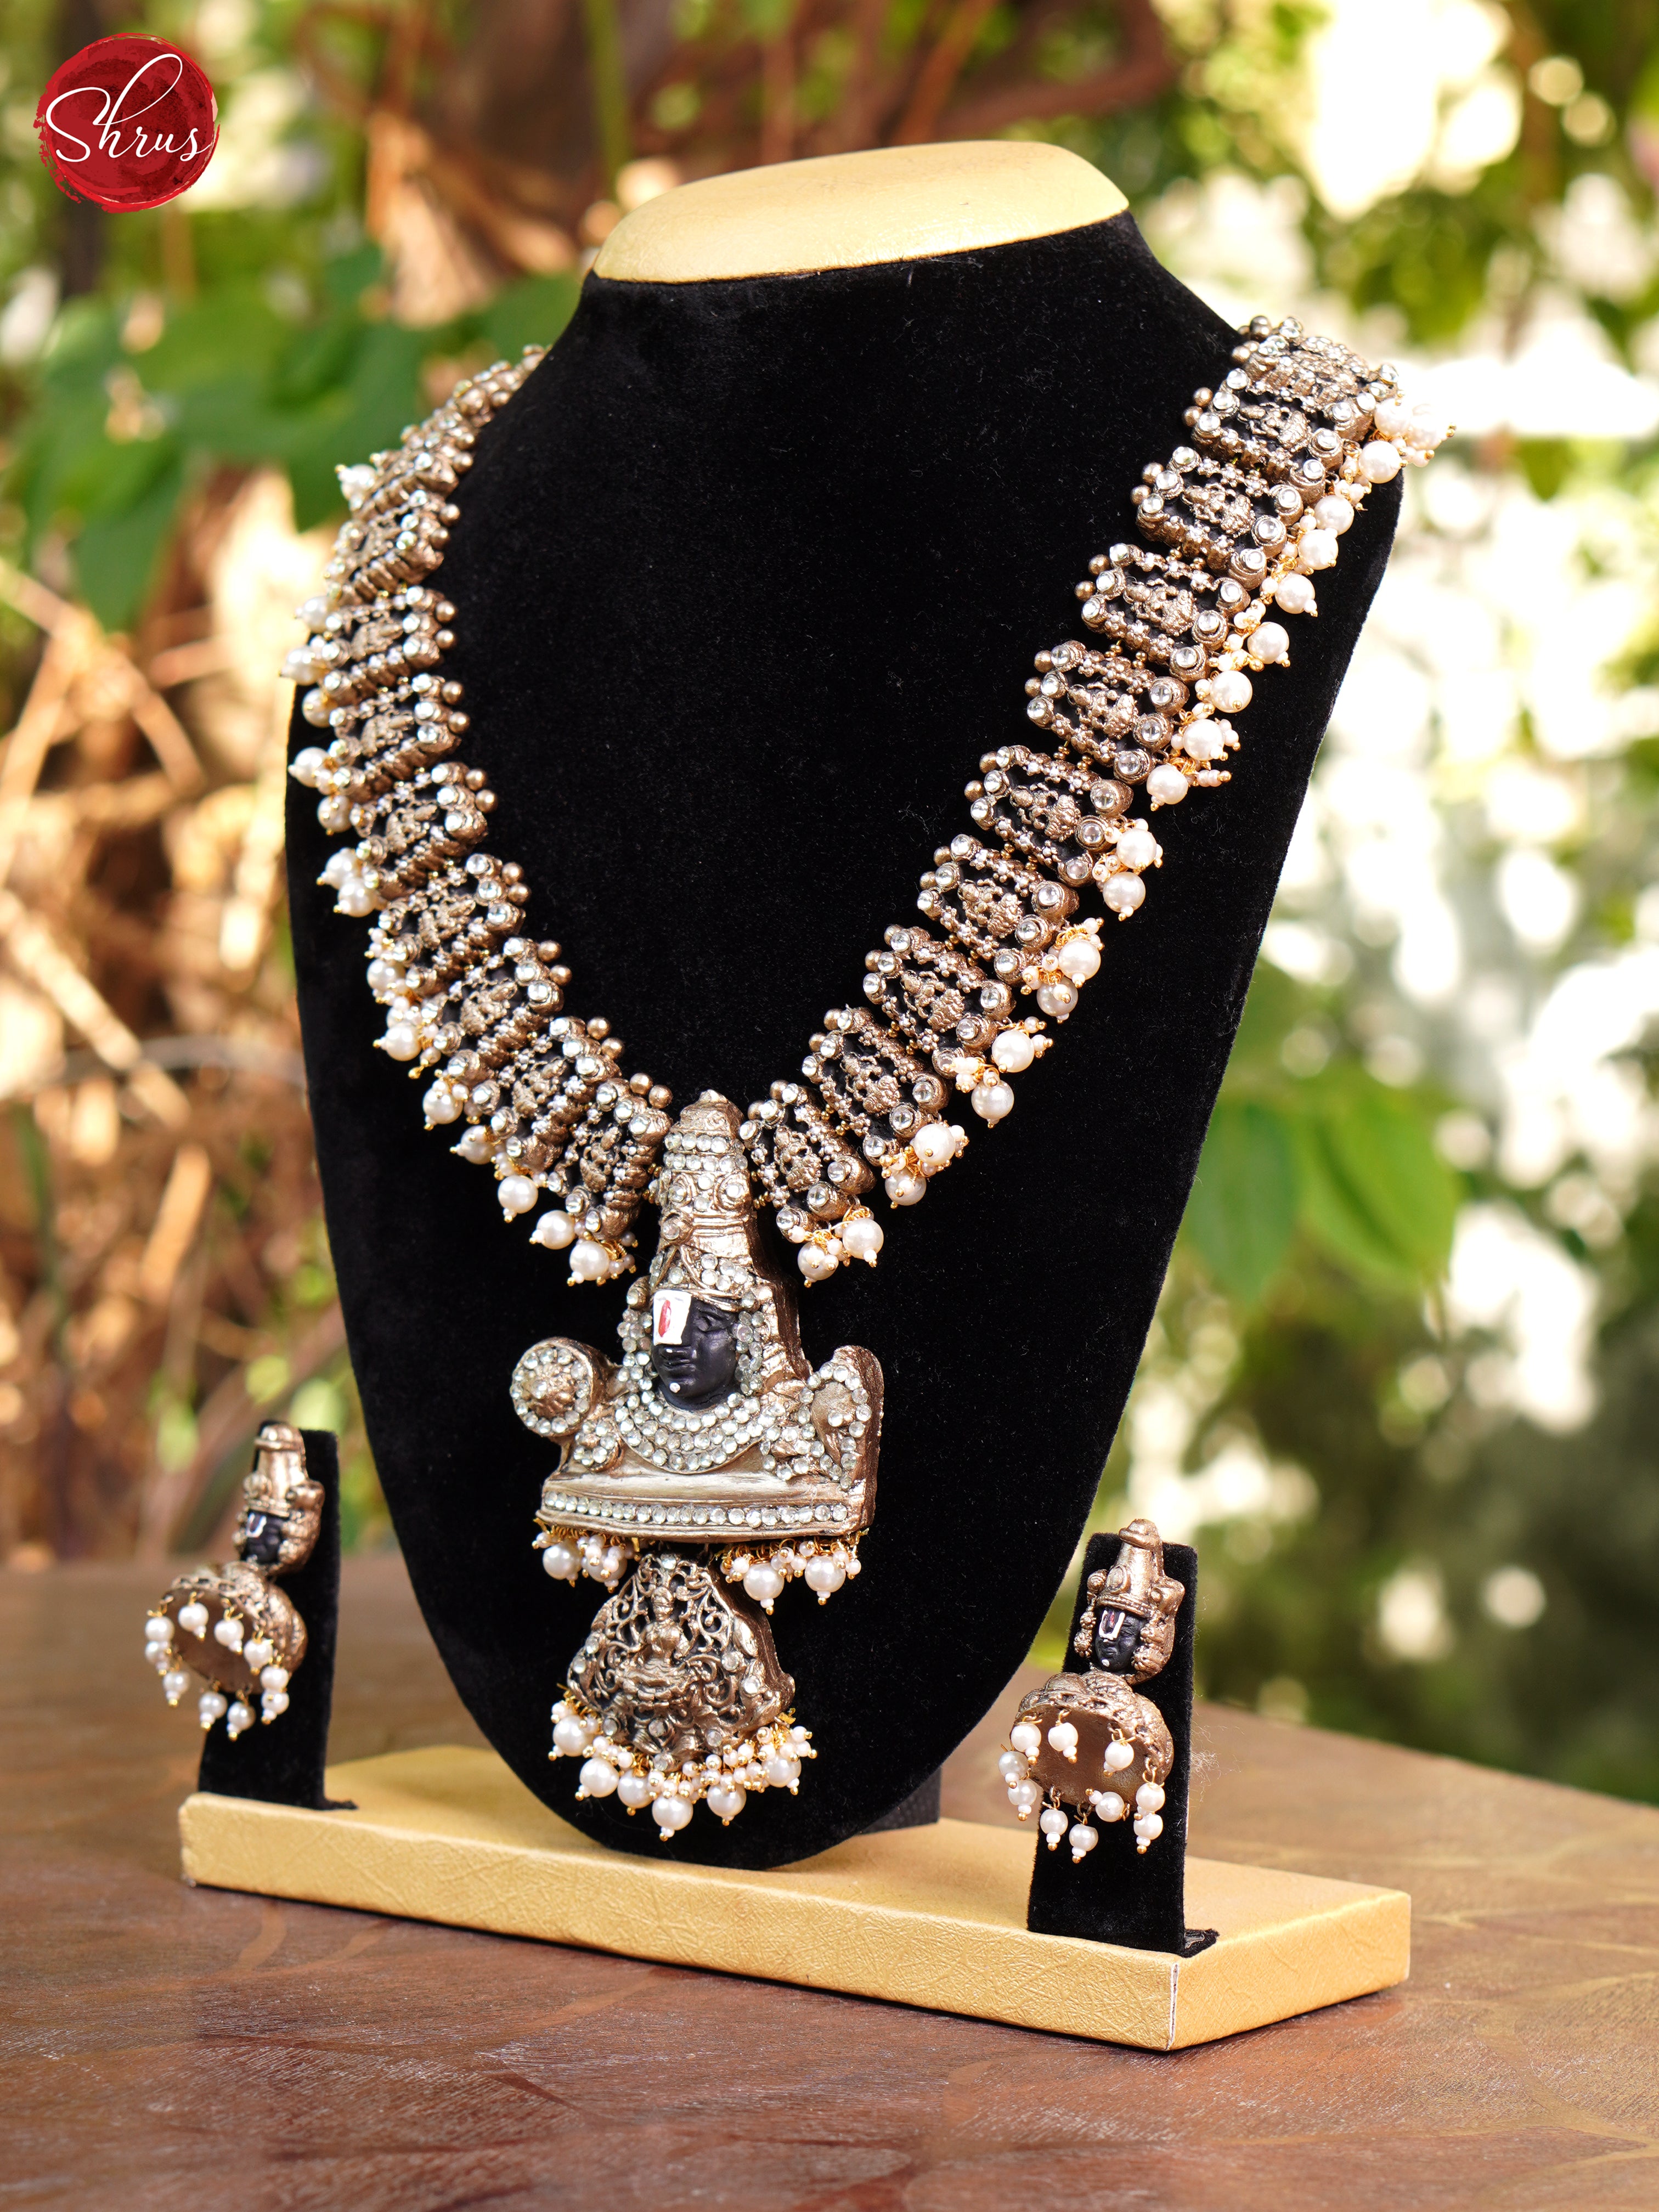 Handcrafted Balaji pendant Terra Cotta necklace  with  jhumkas - Accessories - Shop on ShrusEternity.com